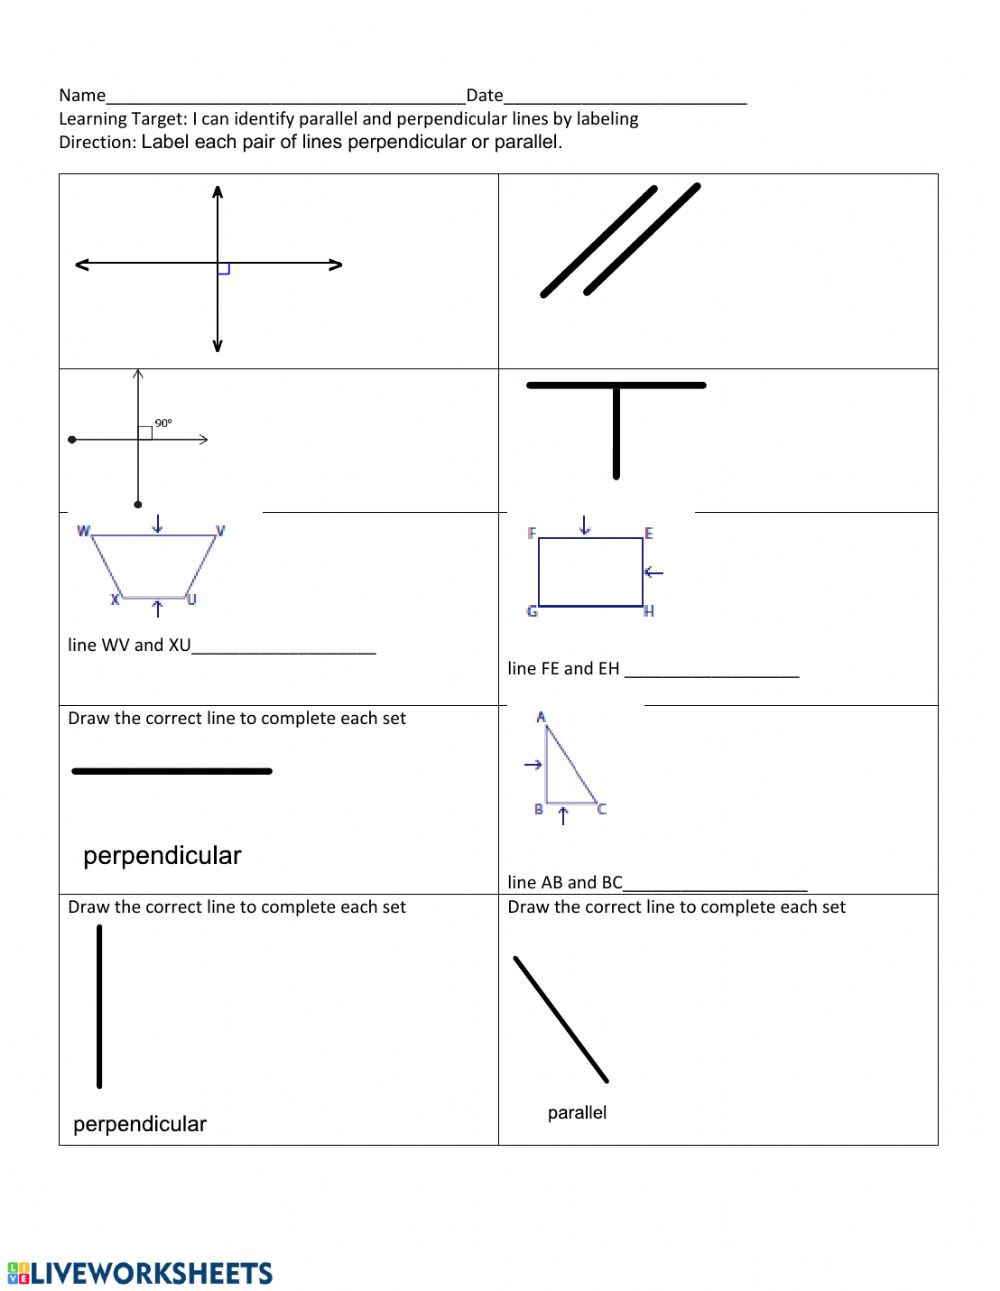 Parallel and Perpendicular Lines Worksheet Parallel and Perpendicular Lines Interactive Worksheet